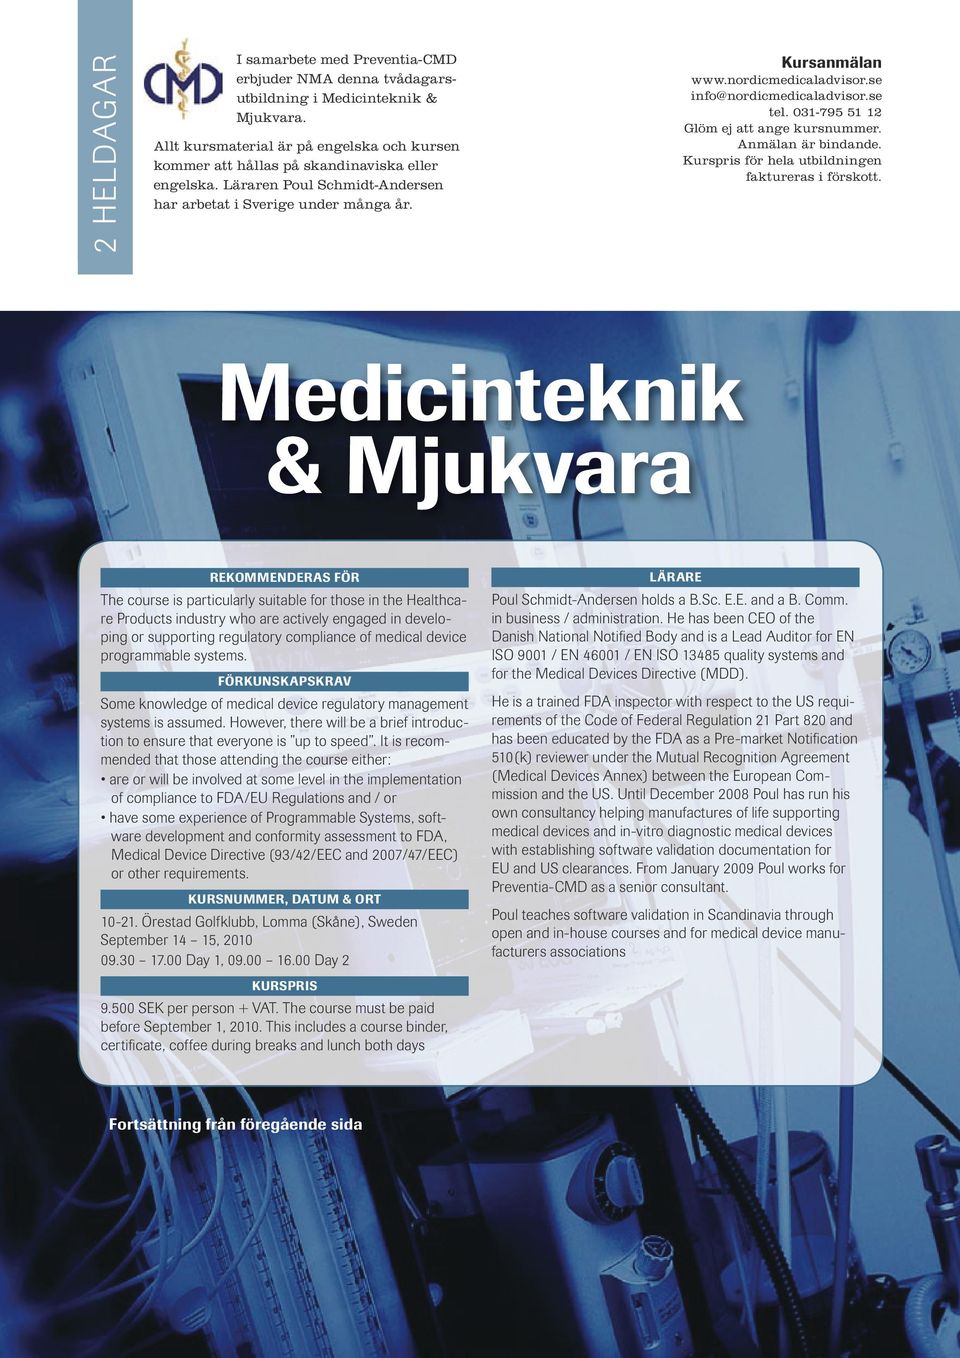 Medicinteknik & Mjukvara Rekommenderas för The course is particularly suitable for those in the Healthcare Products industry who are actively engaged in developing or supporting regulatory compliance